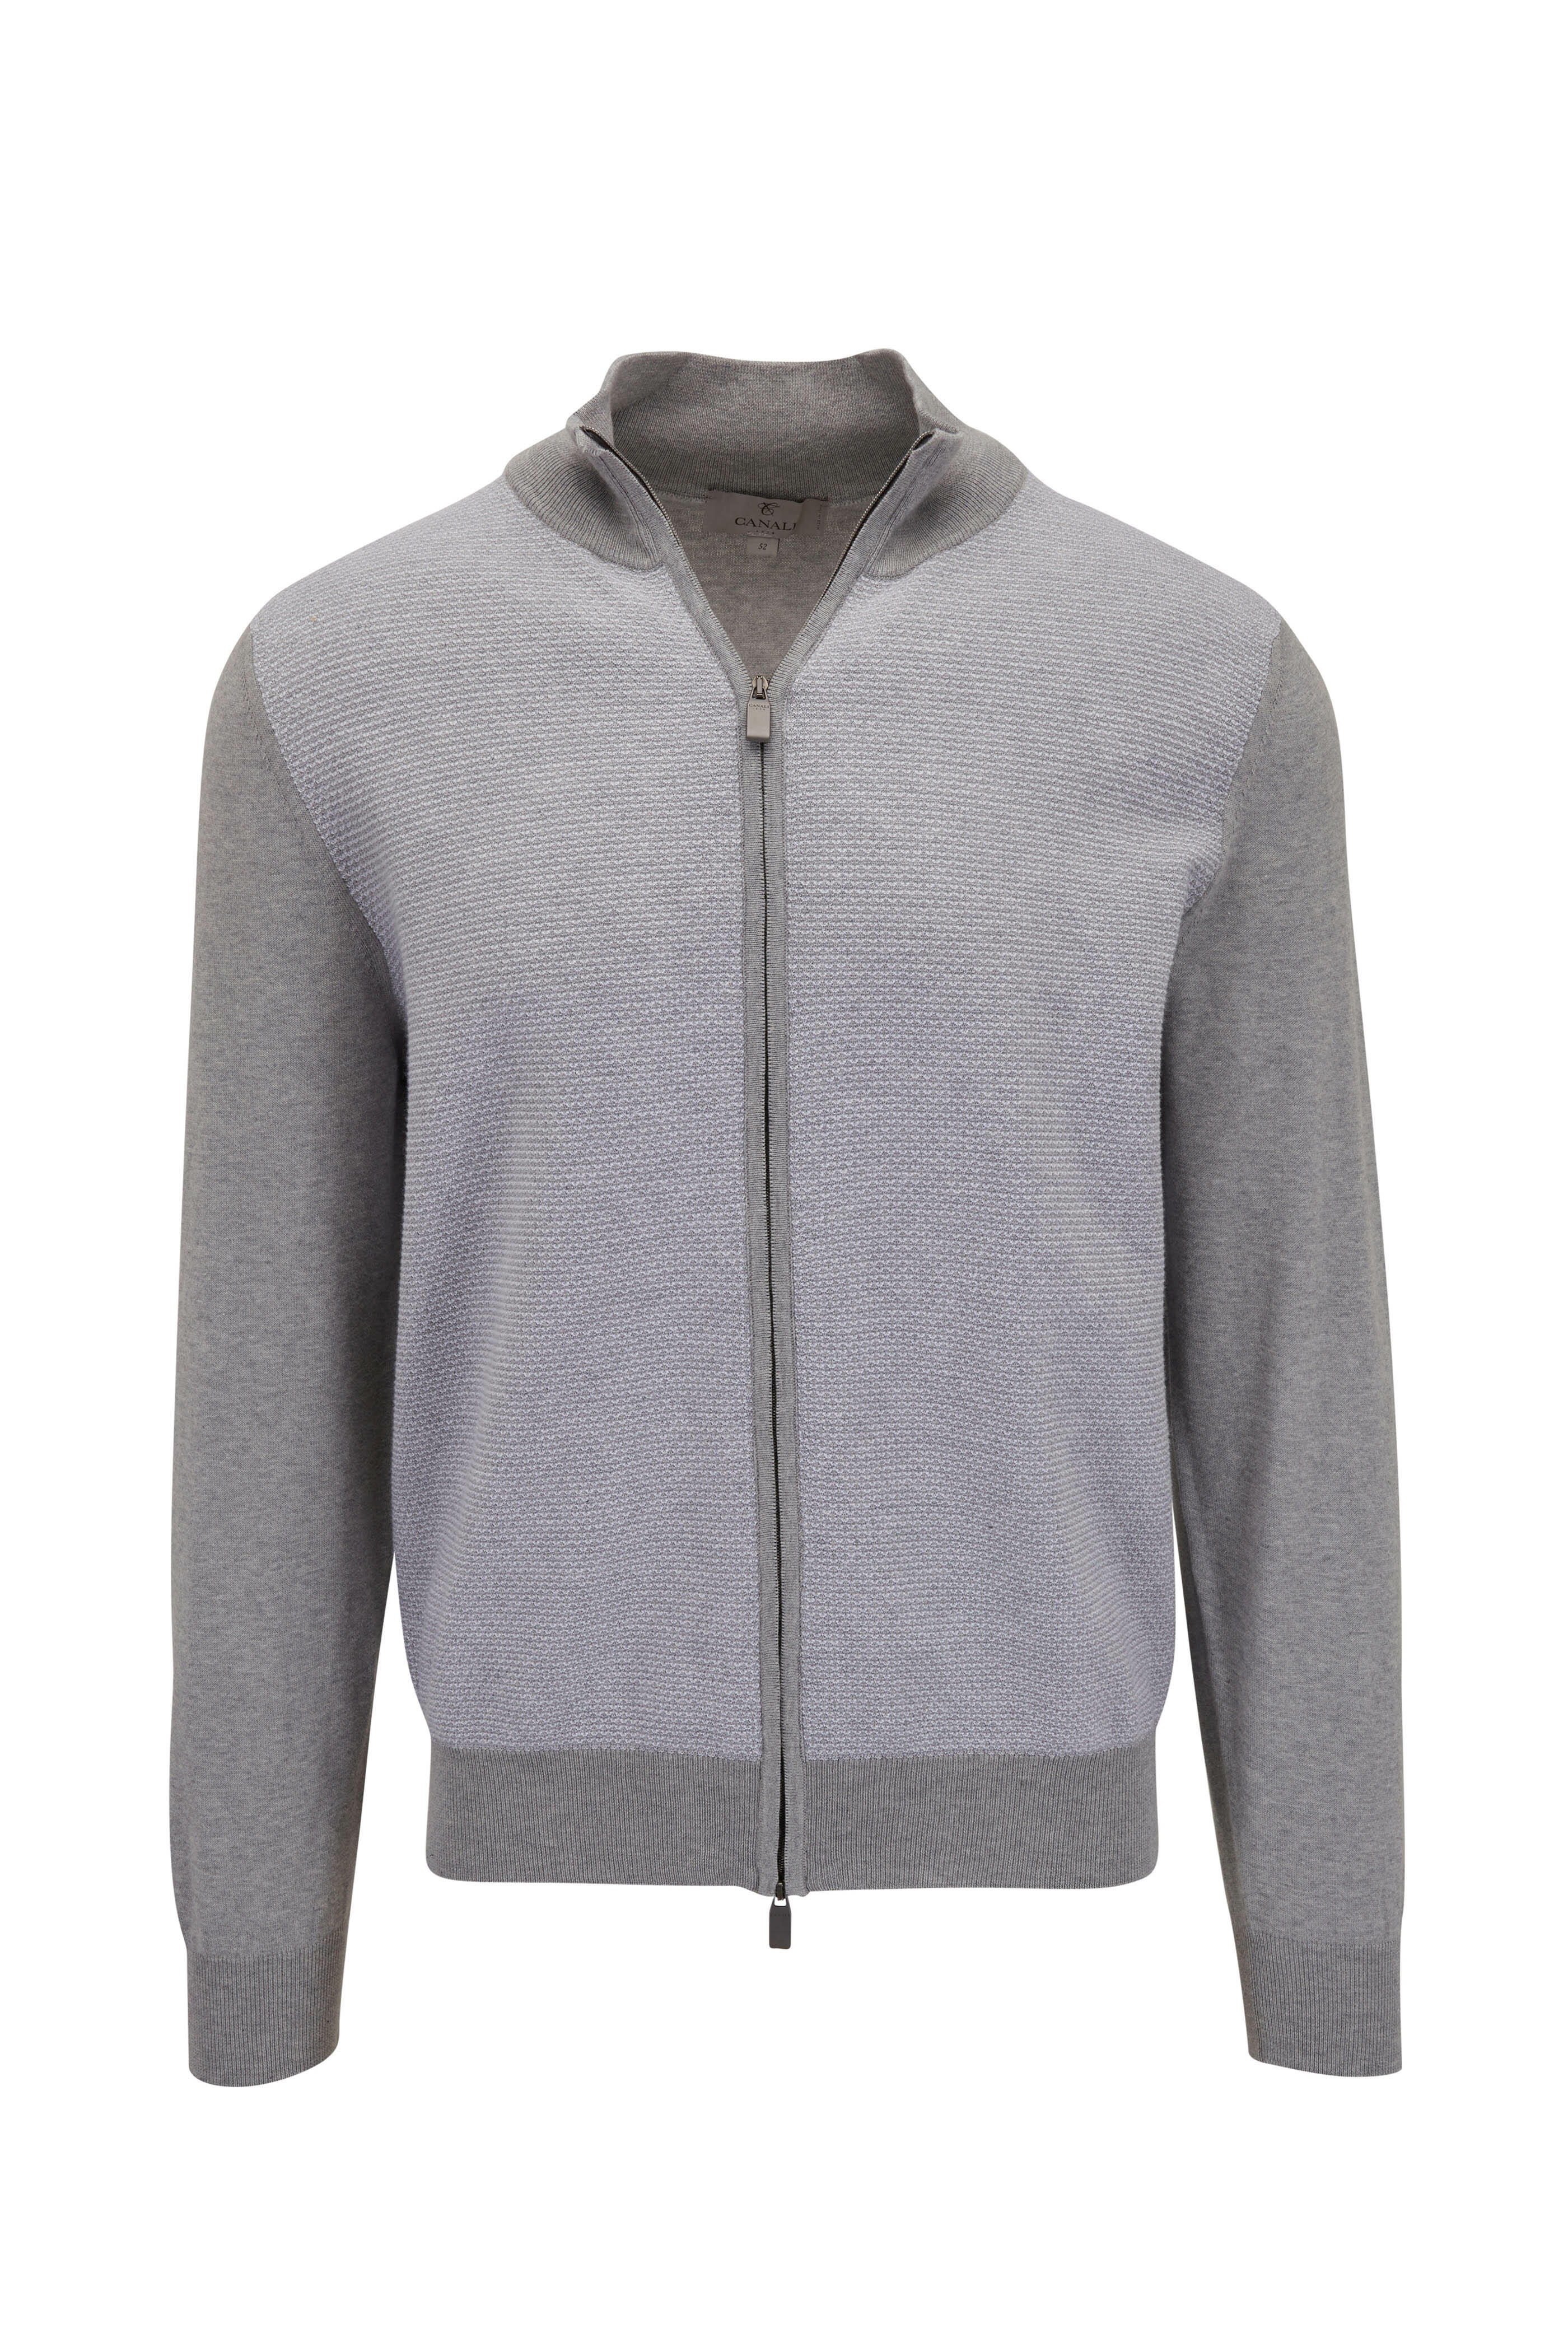 Canali - Light Gray Textured Full Zip Sweater | Mitchell Stores